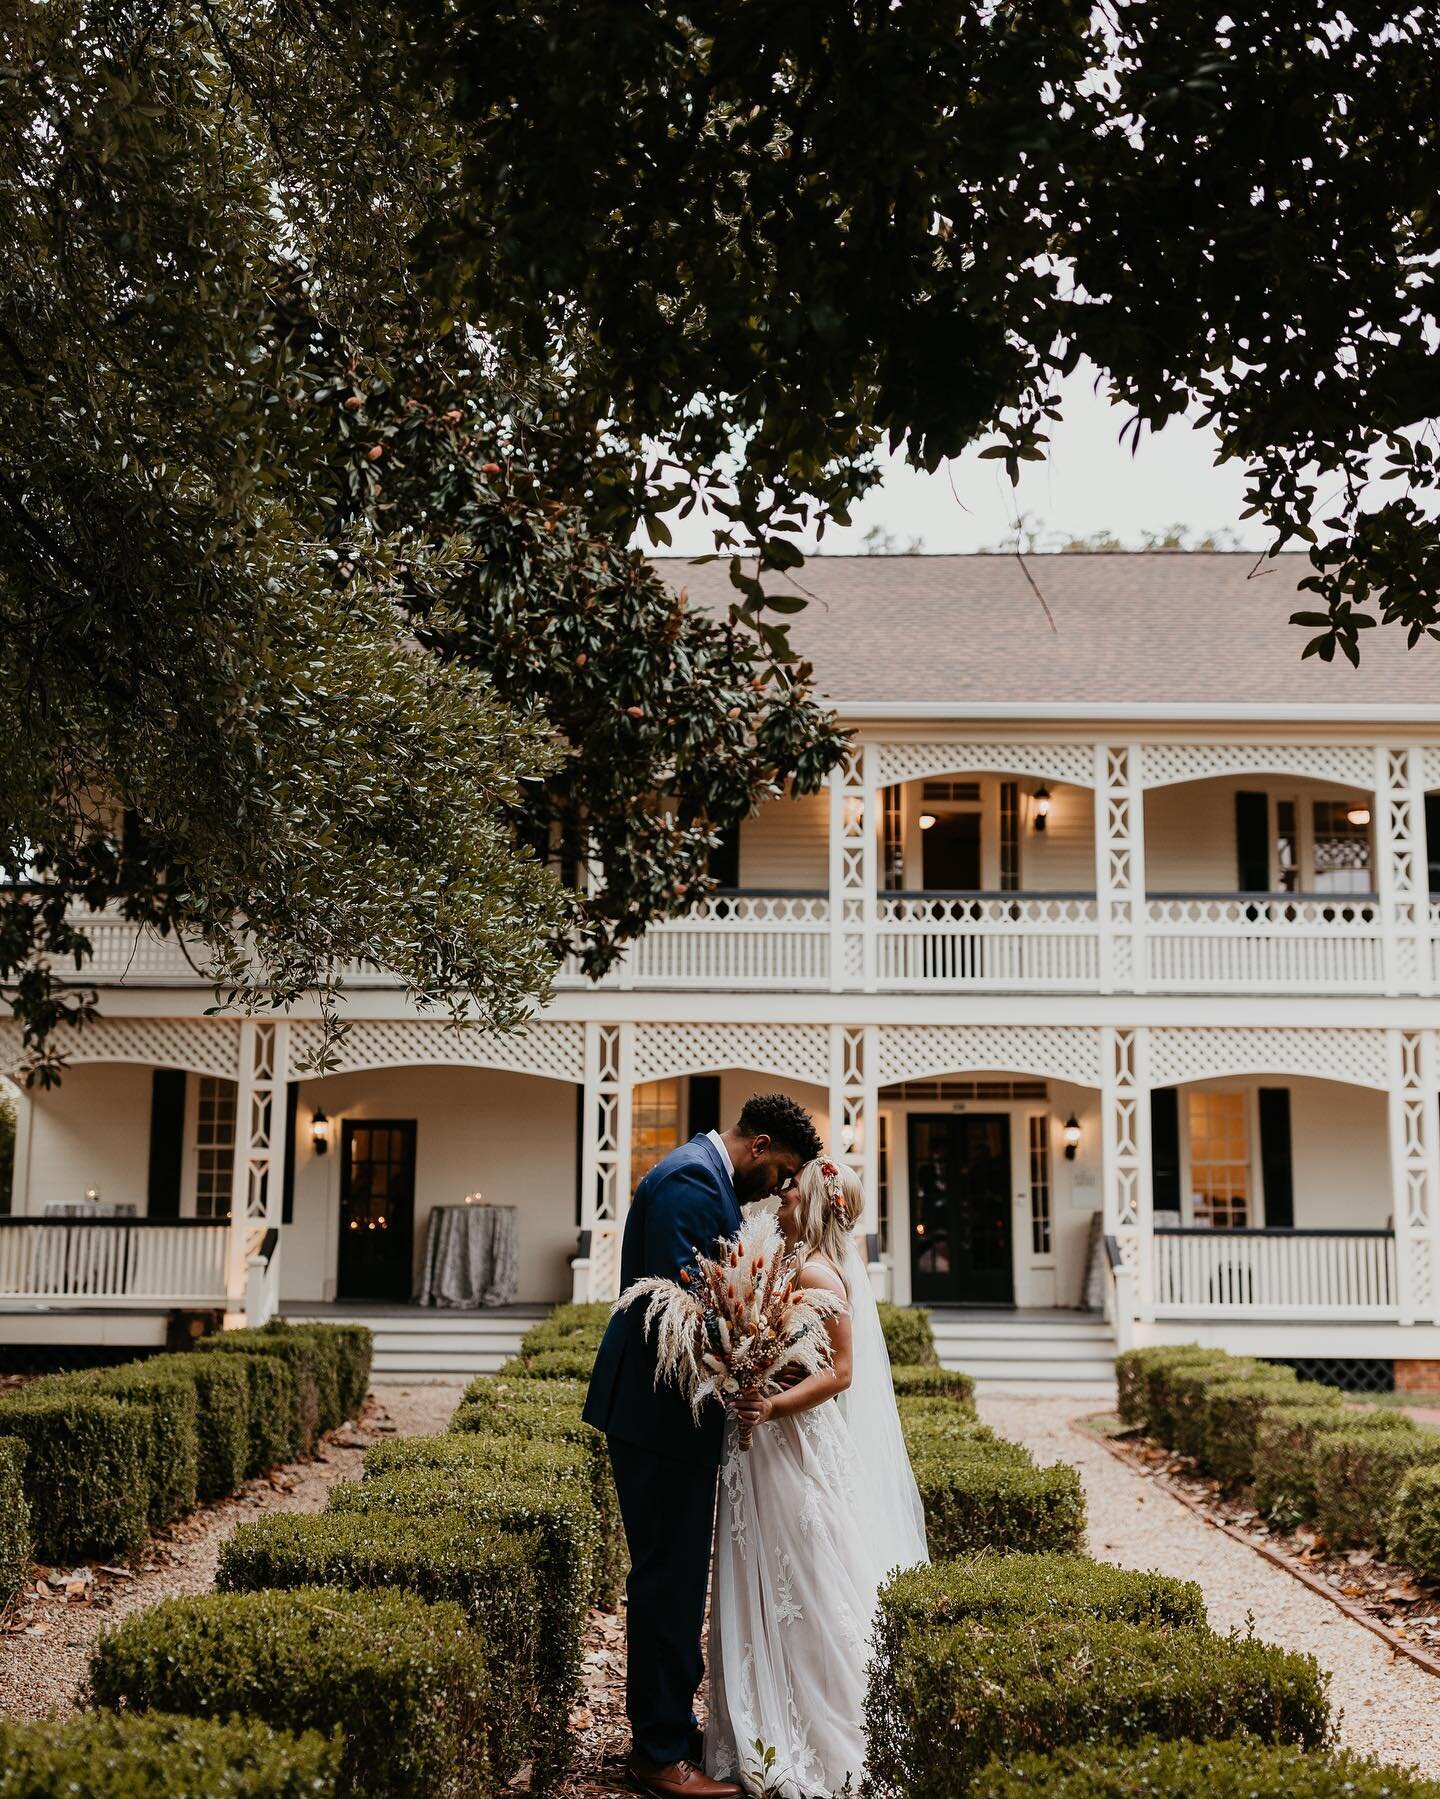 Allow us to be the backdrop for your perfect day.

Jeremy + Caitlyn | Oct. 1st, 2022

Schedule your event with us today! 
(803) 329-1020 | rentals@historicrockhill.com

📸: @mazzuccophotography 
📍: @thewhitehome.rockhill 
🕺🏻: @hospitalitybutler

#